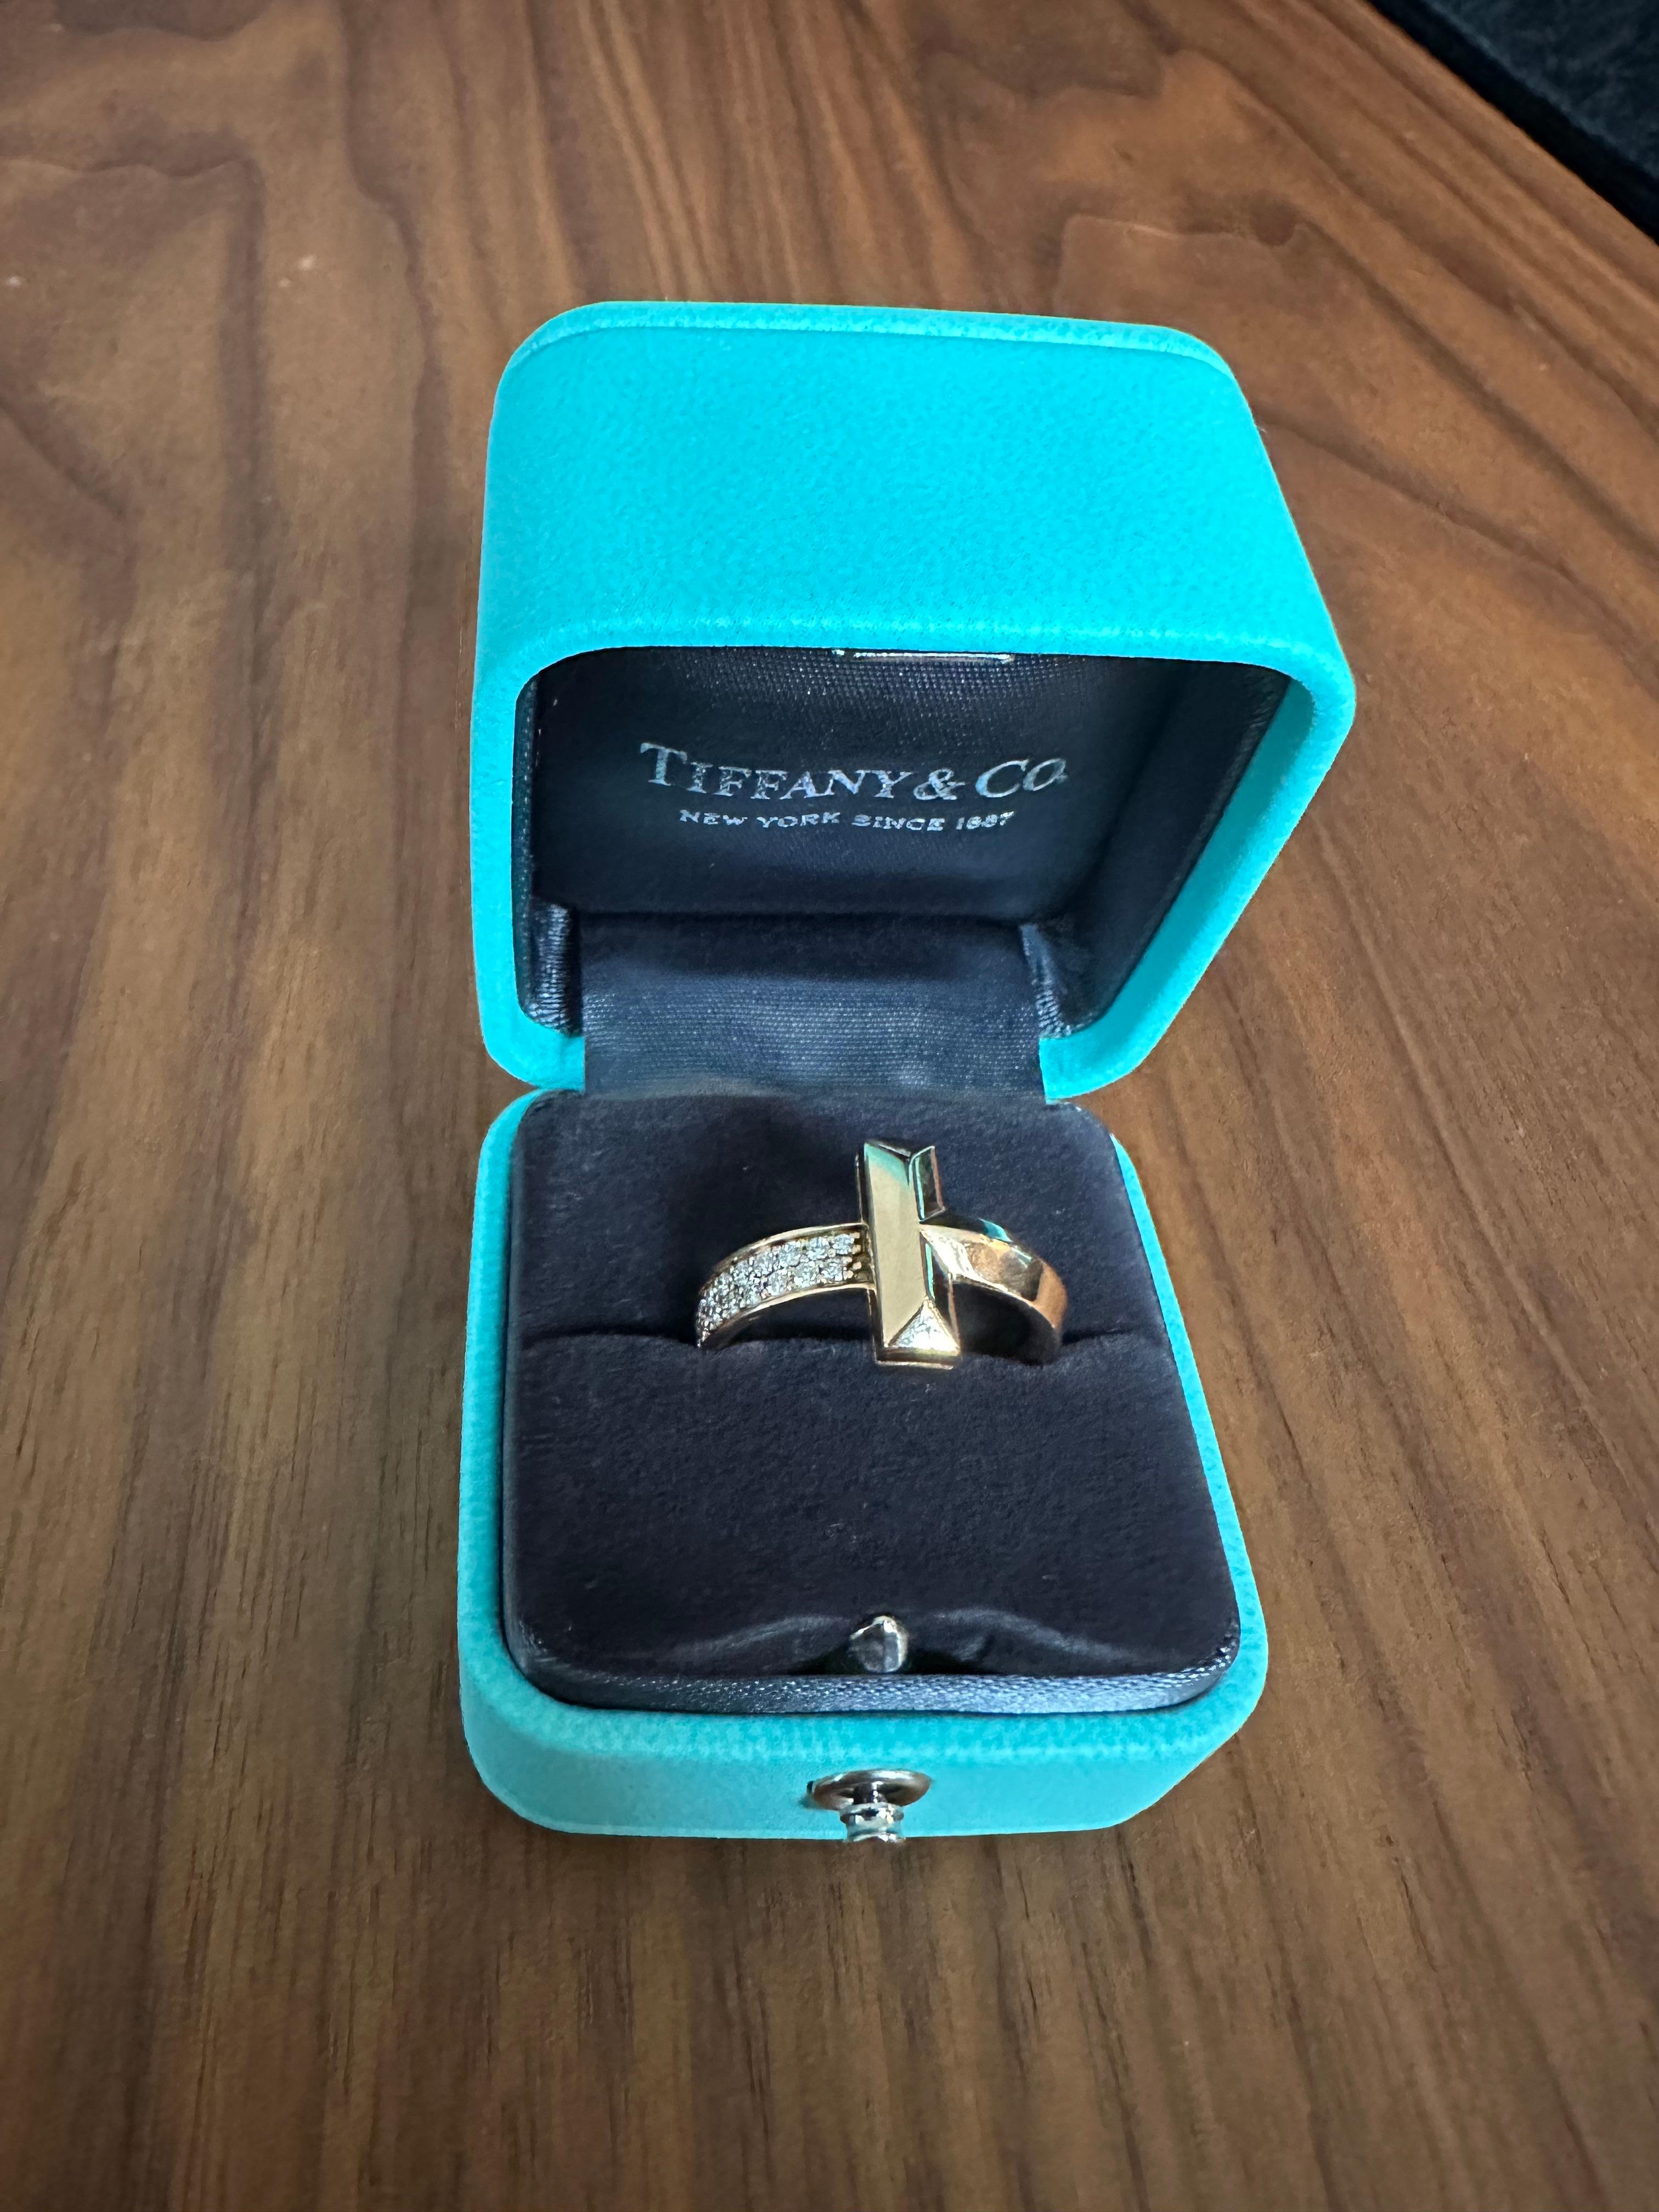 Tiffany CO T T1 wide ring with half row brilliant cut diamonds 0.21 ctw
size 6.5
comes within the box
no defects and visible signs of usage 
never been refurbished 
Retail value over $5,000
Great as a gift 
